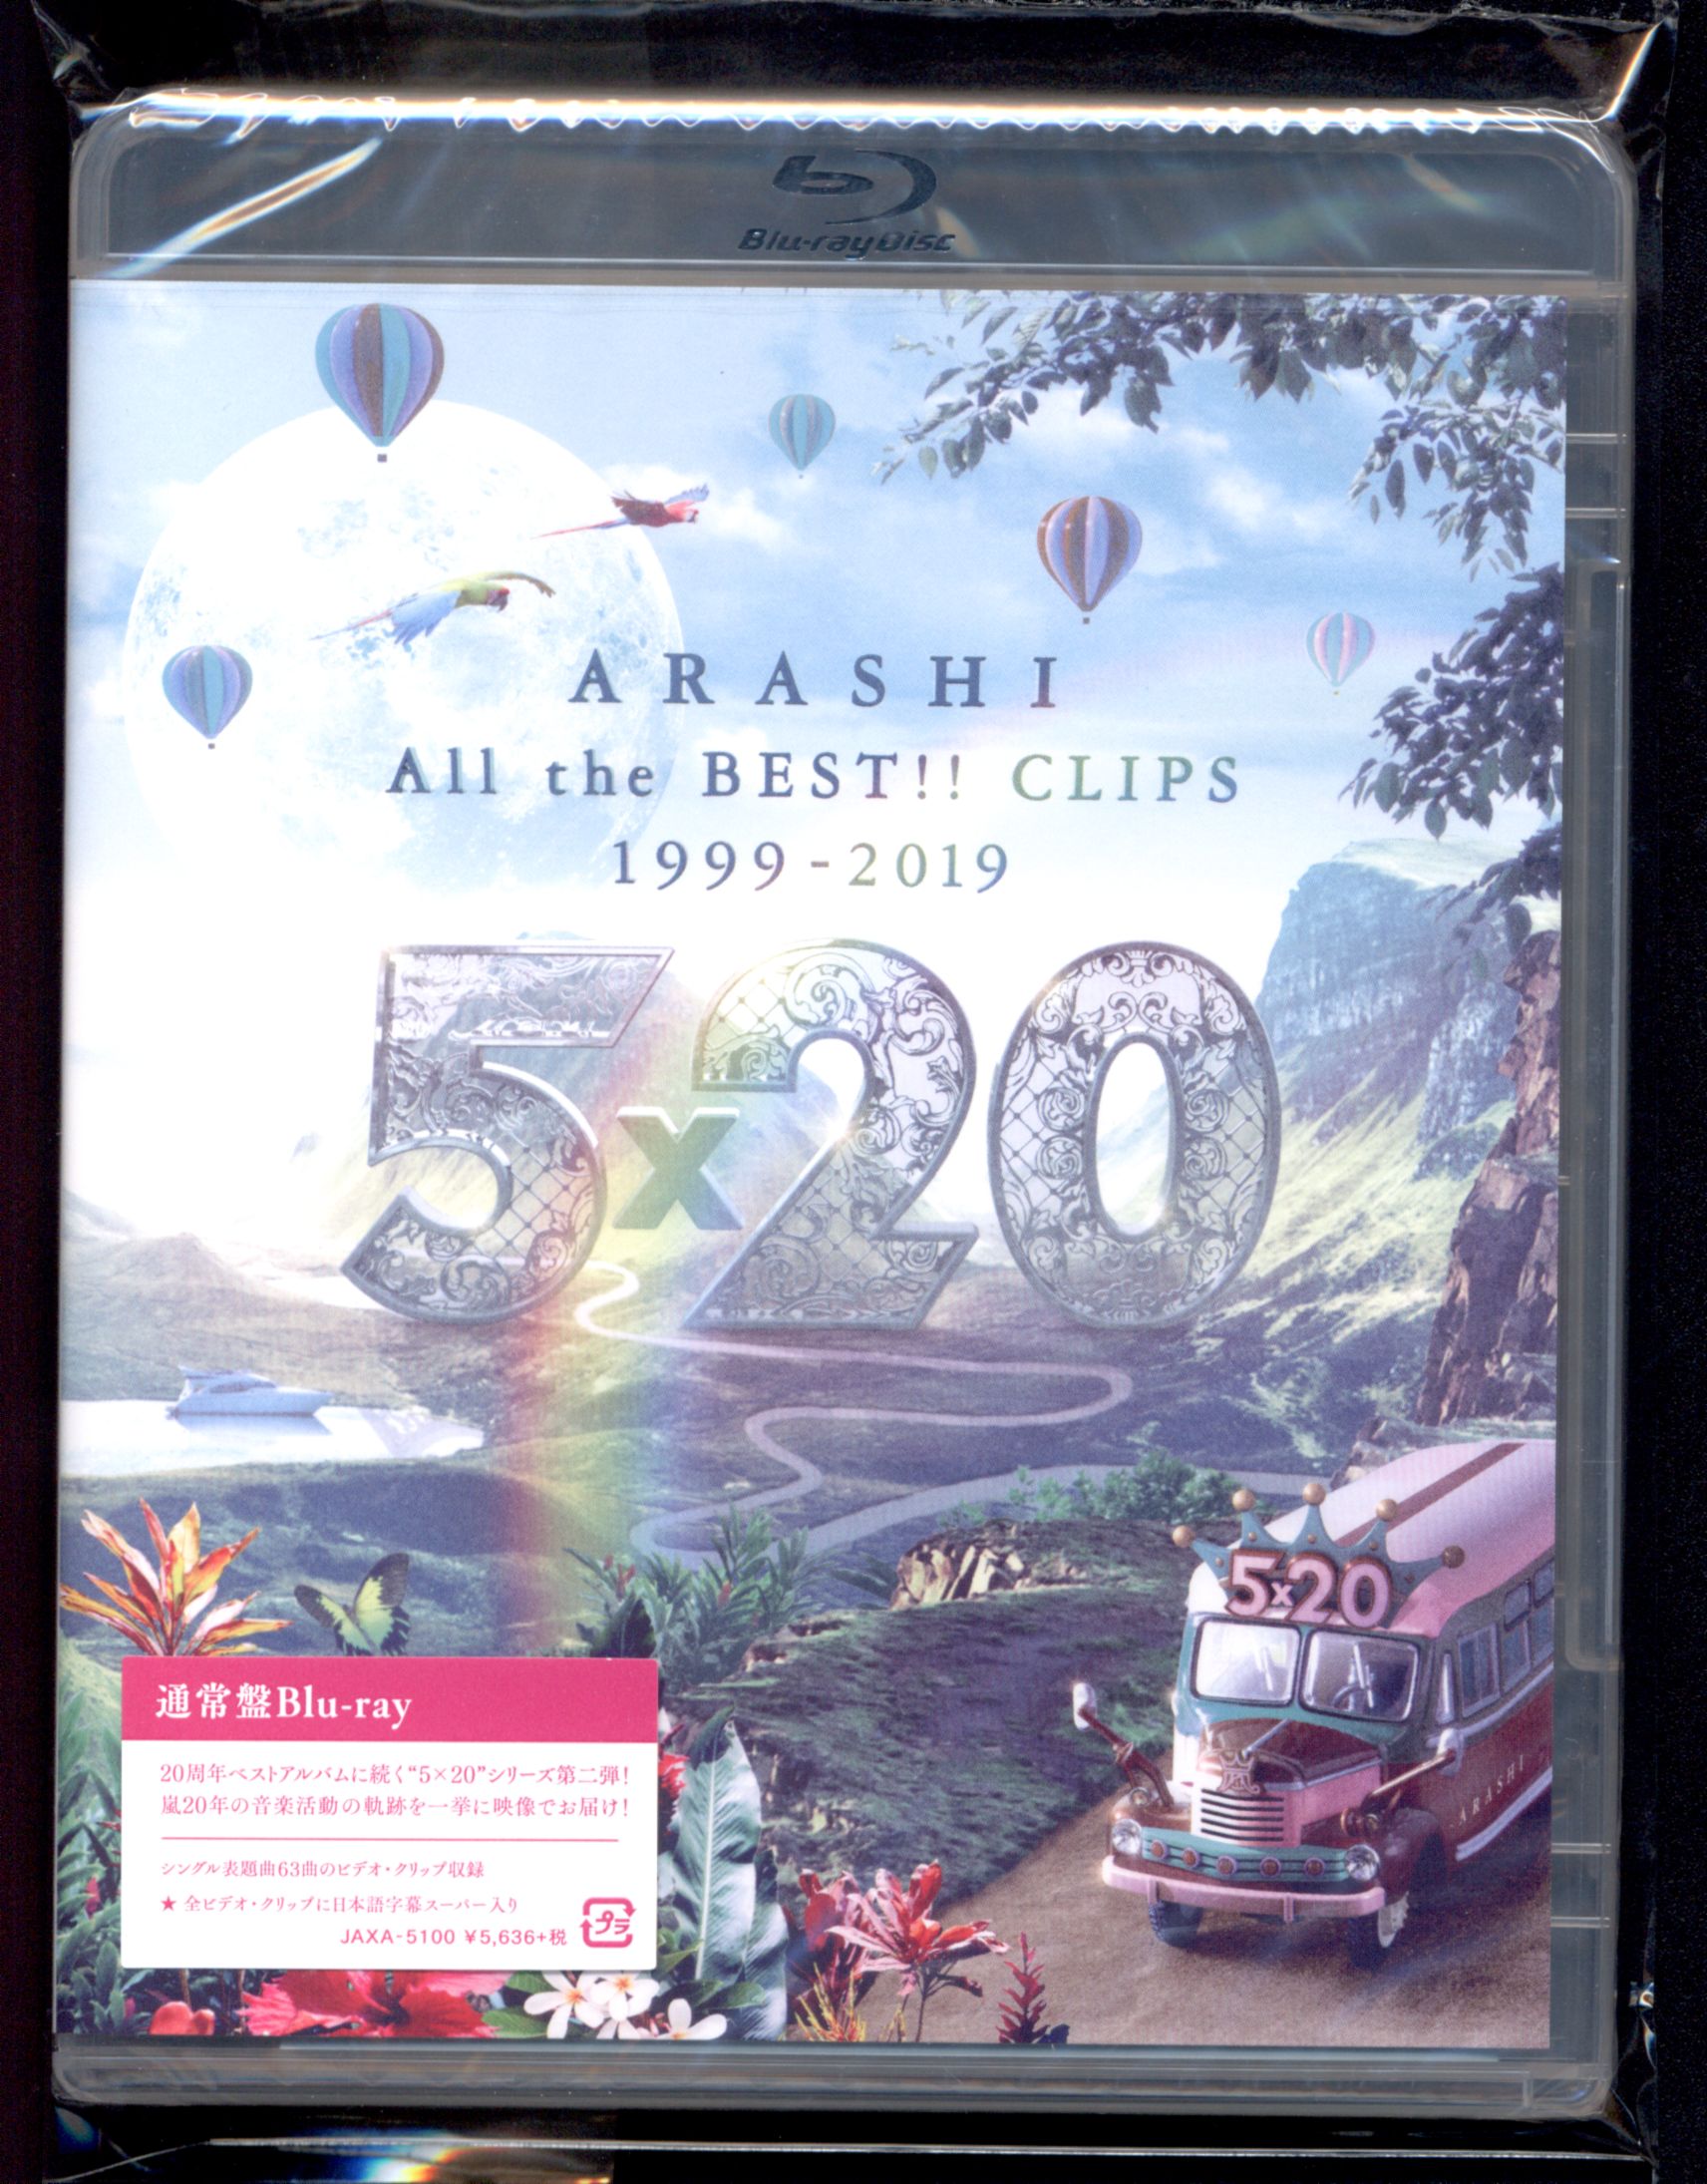 Arashi 5 x 20 All the BEST !! CLIPS 1999-2019 Blu-ray Normal